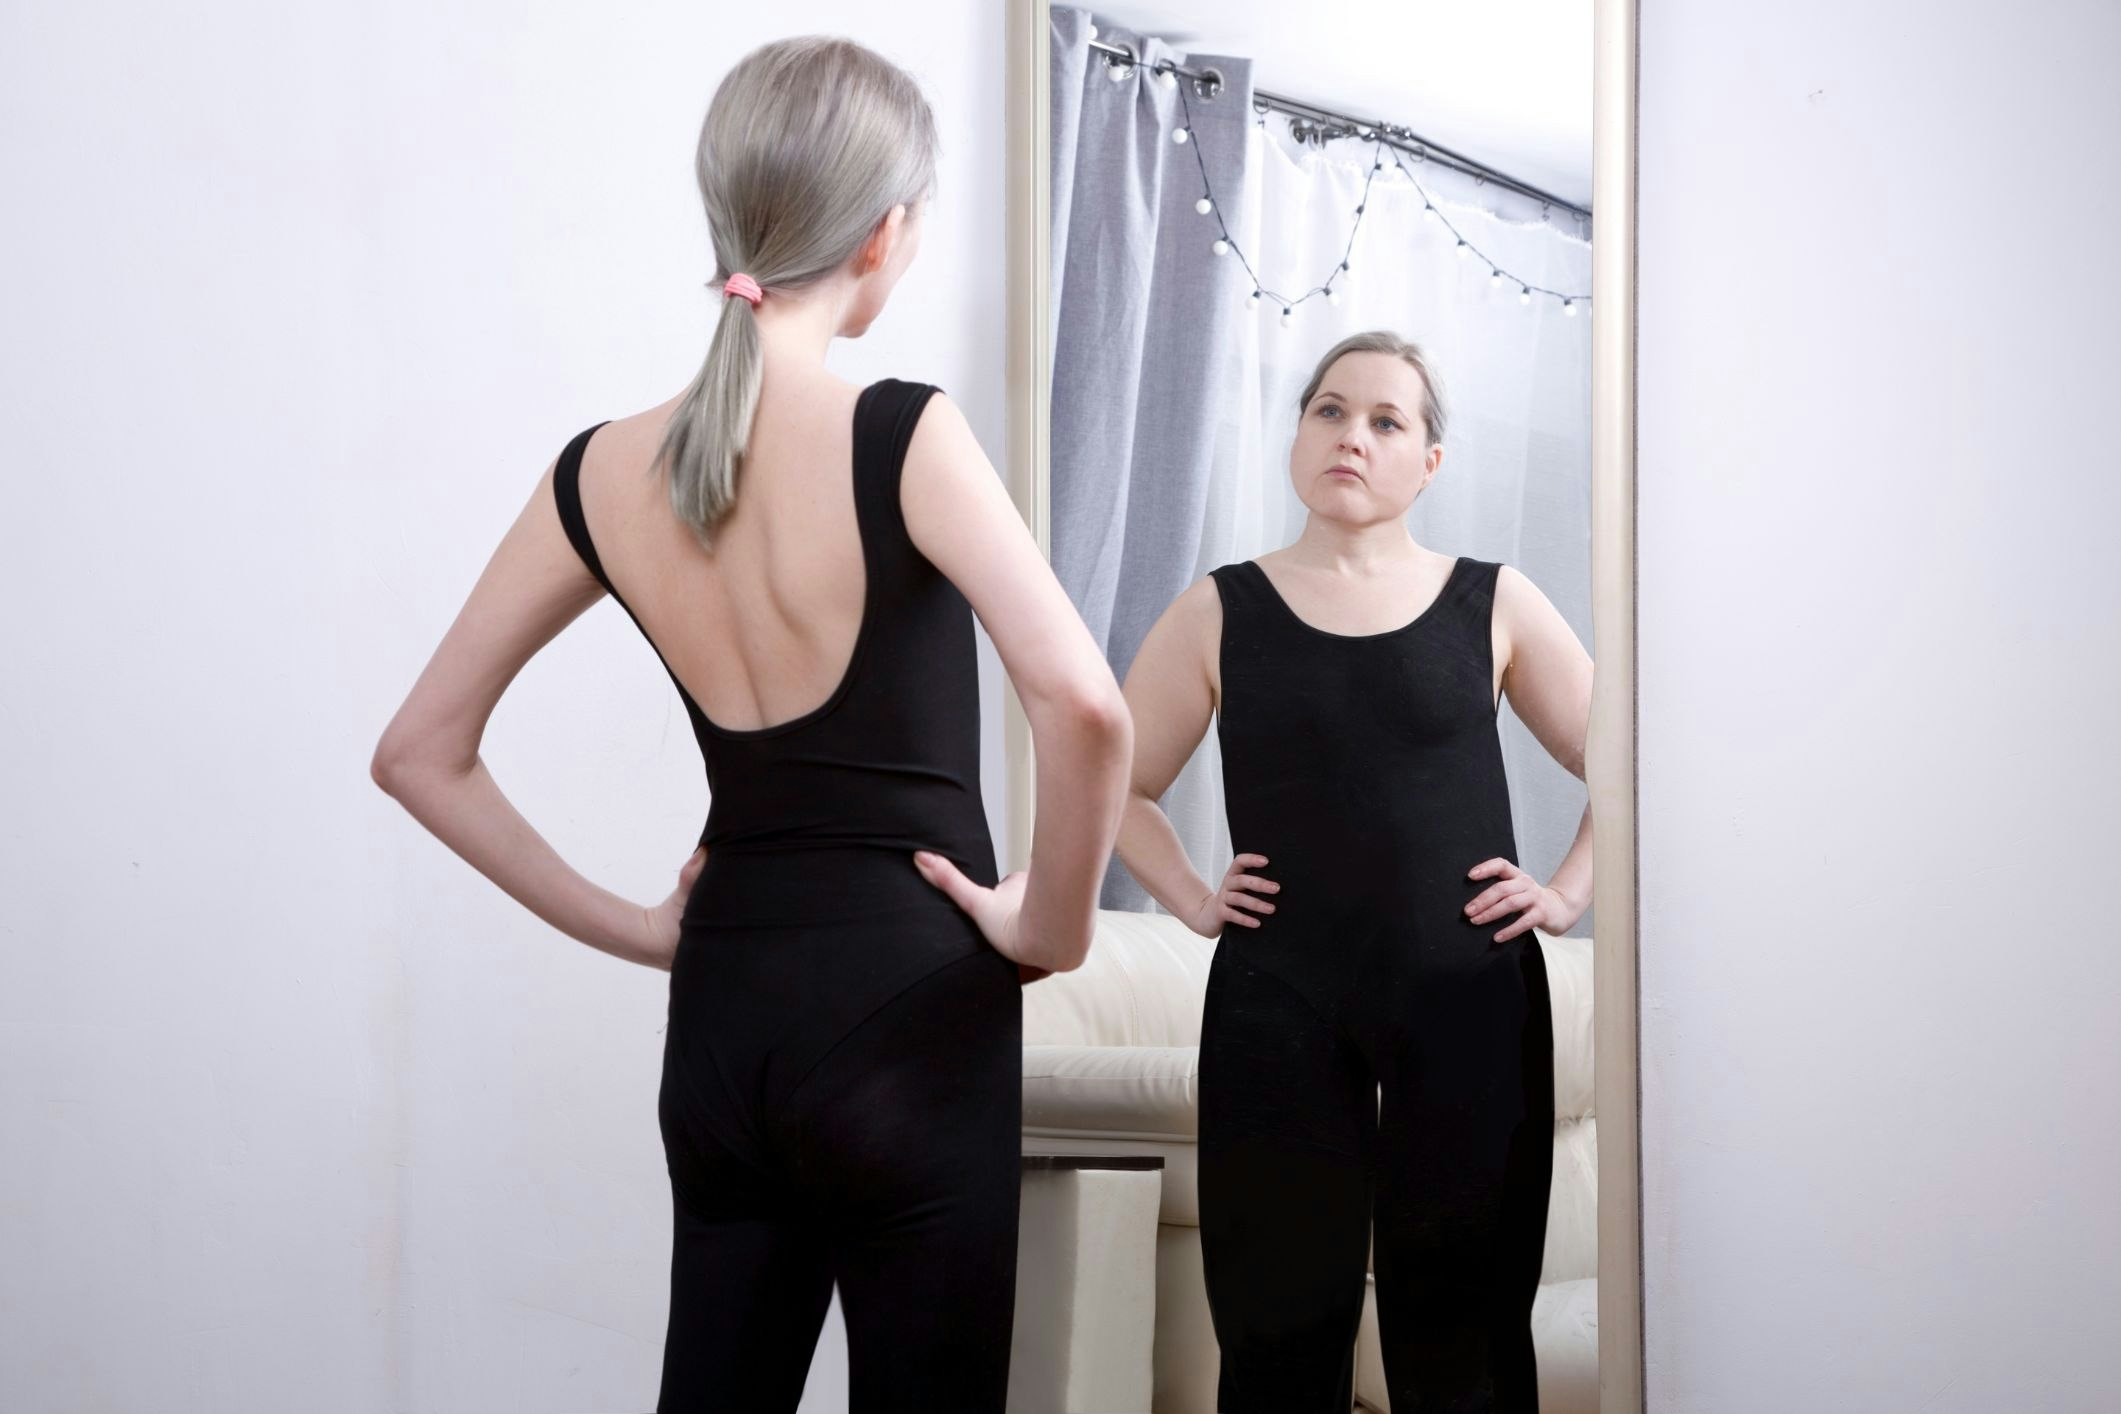  Approximately one million Australians are living with an eating disorder in any given year; that is, four percent of the population. [Source: Shutterstock]
